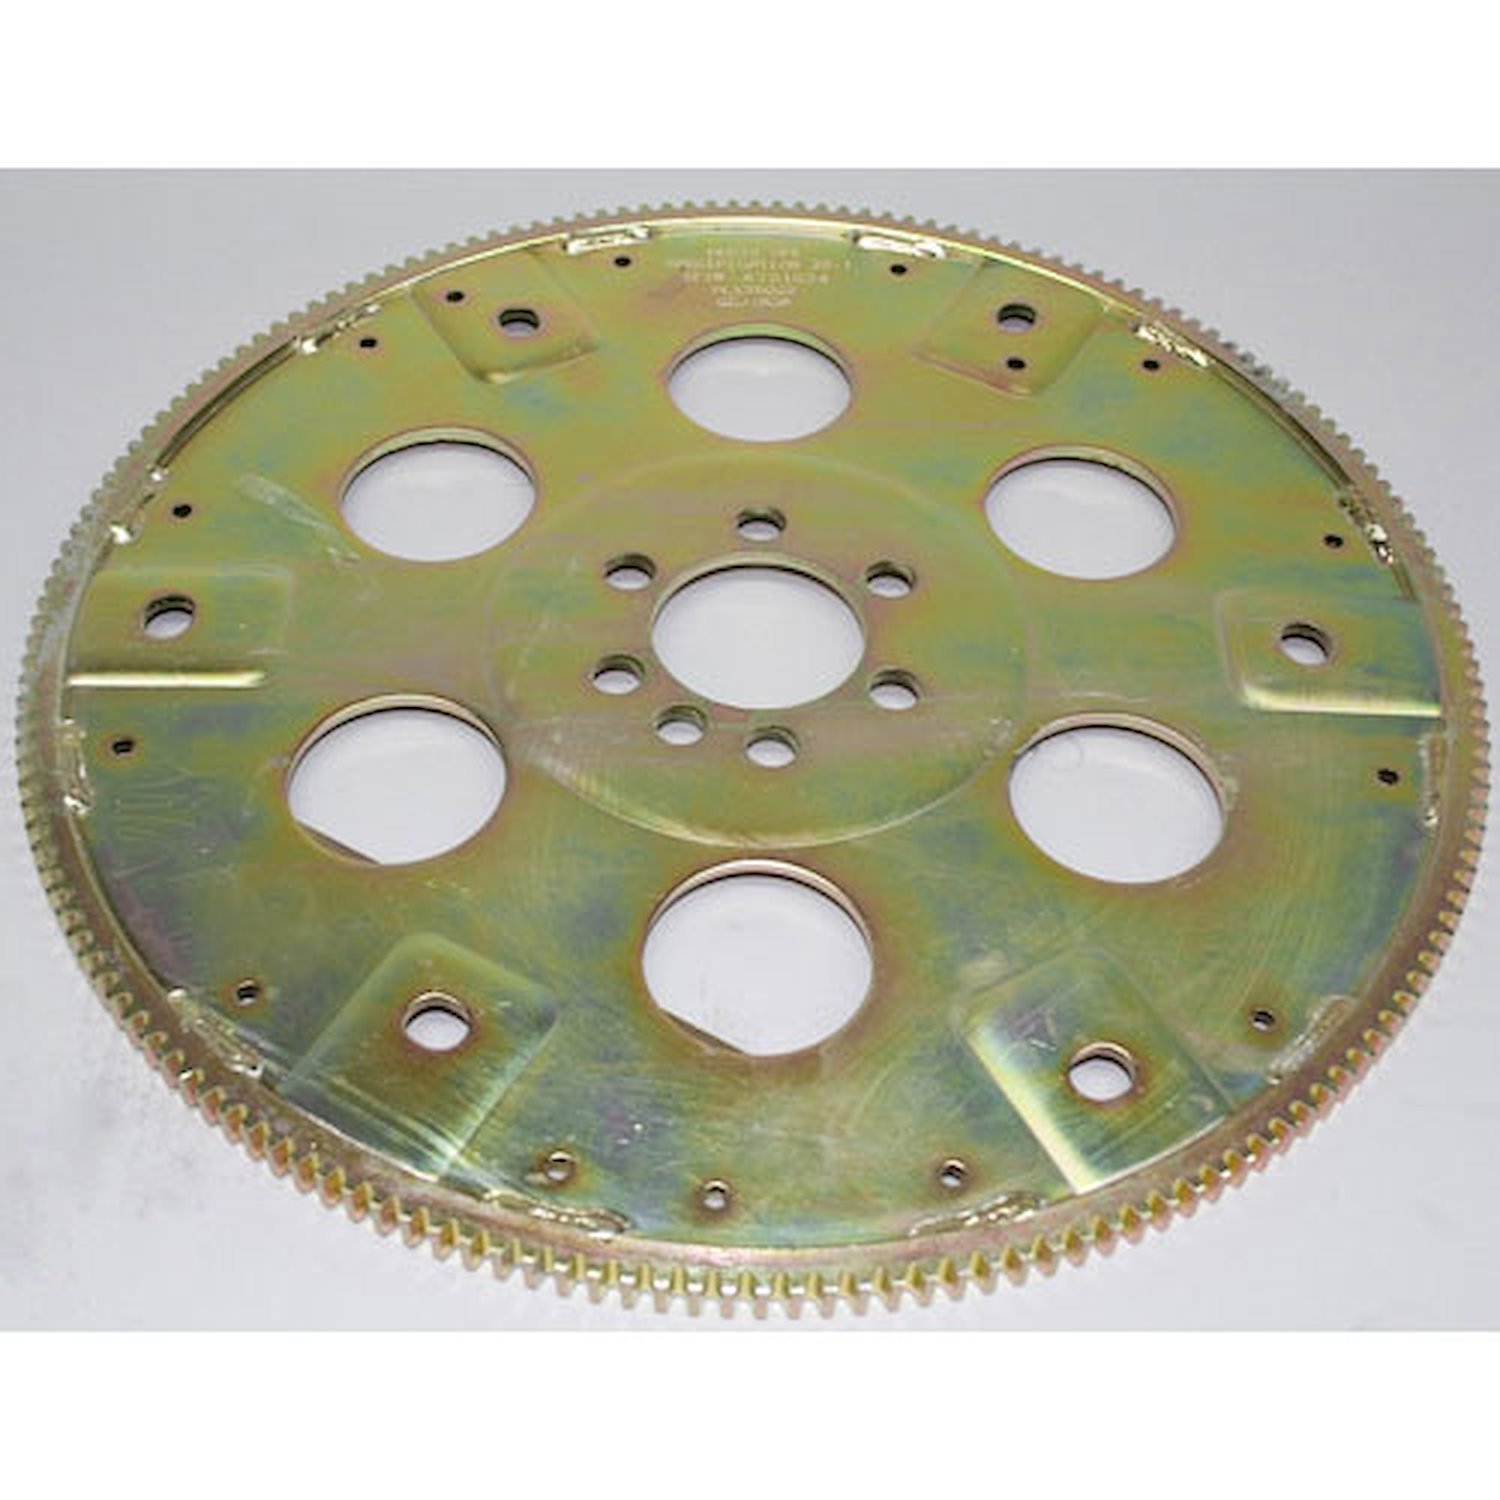 Gold Series SFI-Rated Chromoly Steel Flexplate 1986-97 Small Block Chevy 350 Gen II